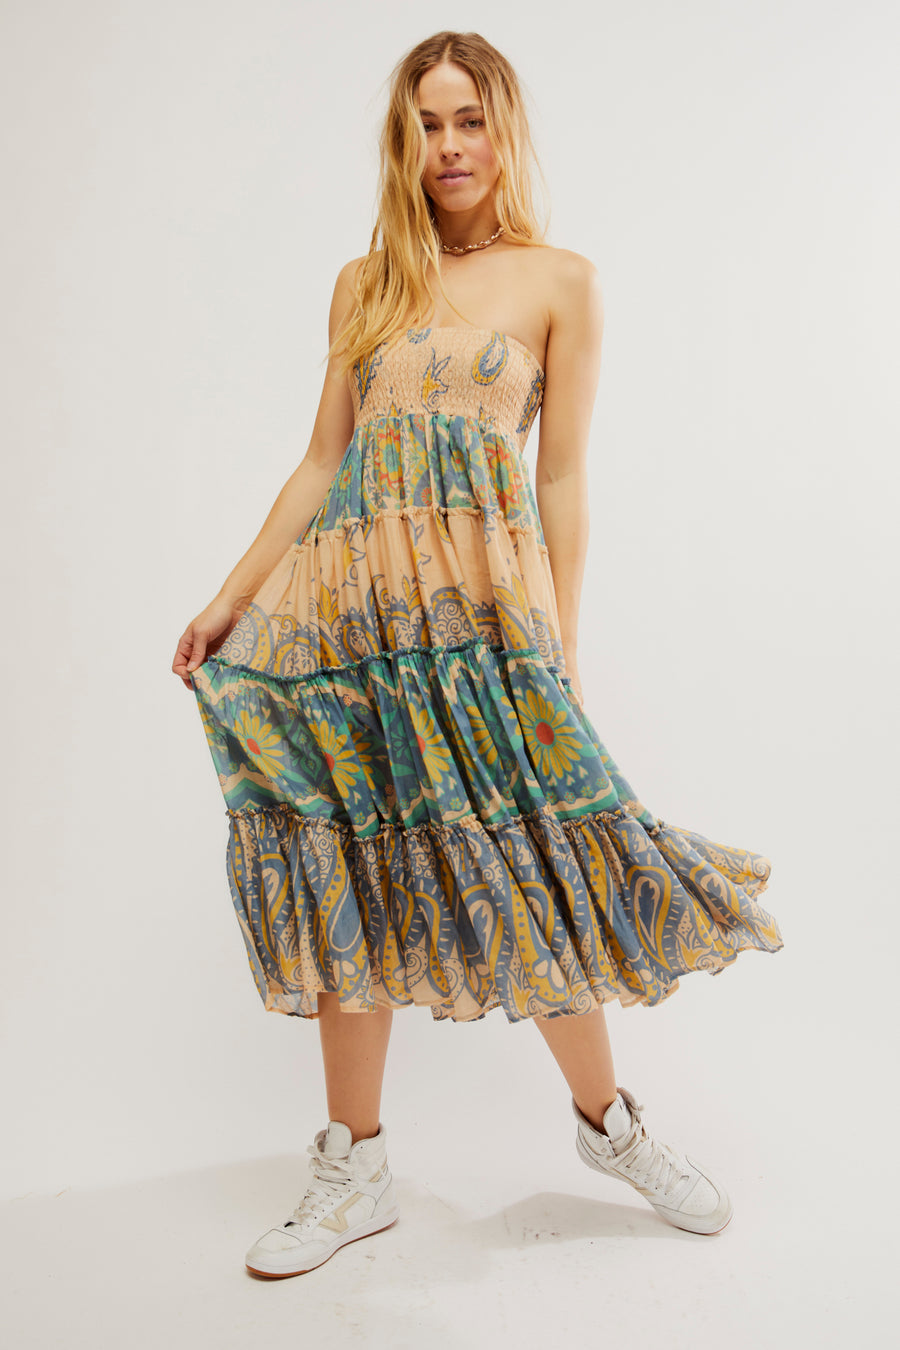 Free People Super Thrills Convertible Maxi Skirt - Blue Sky Combo